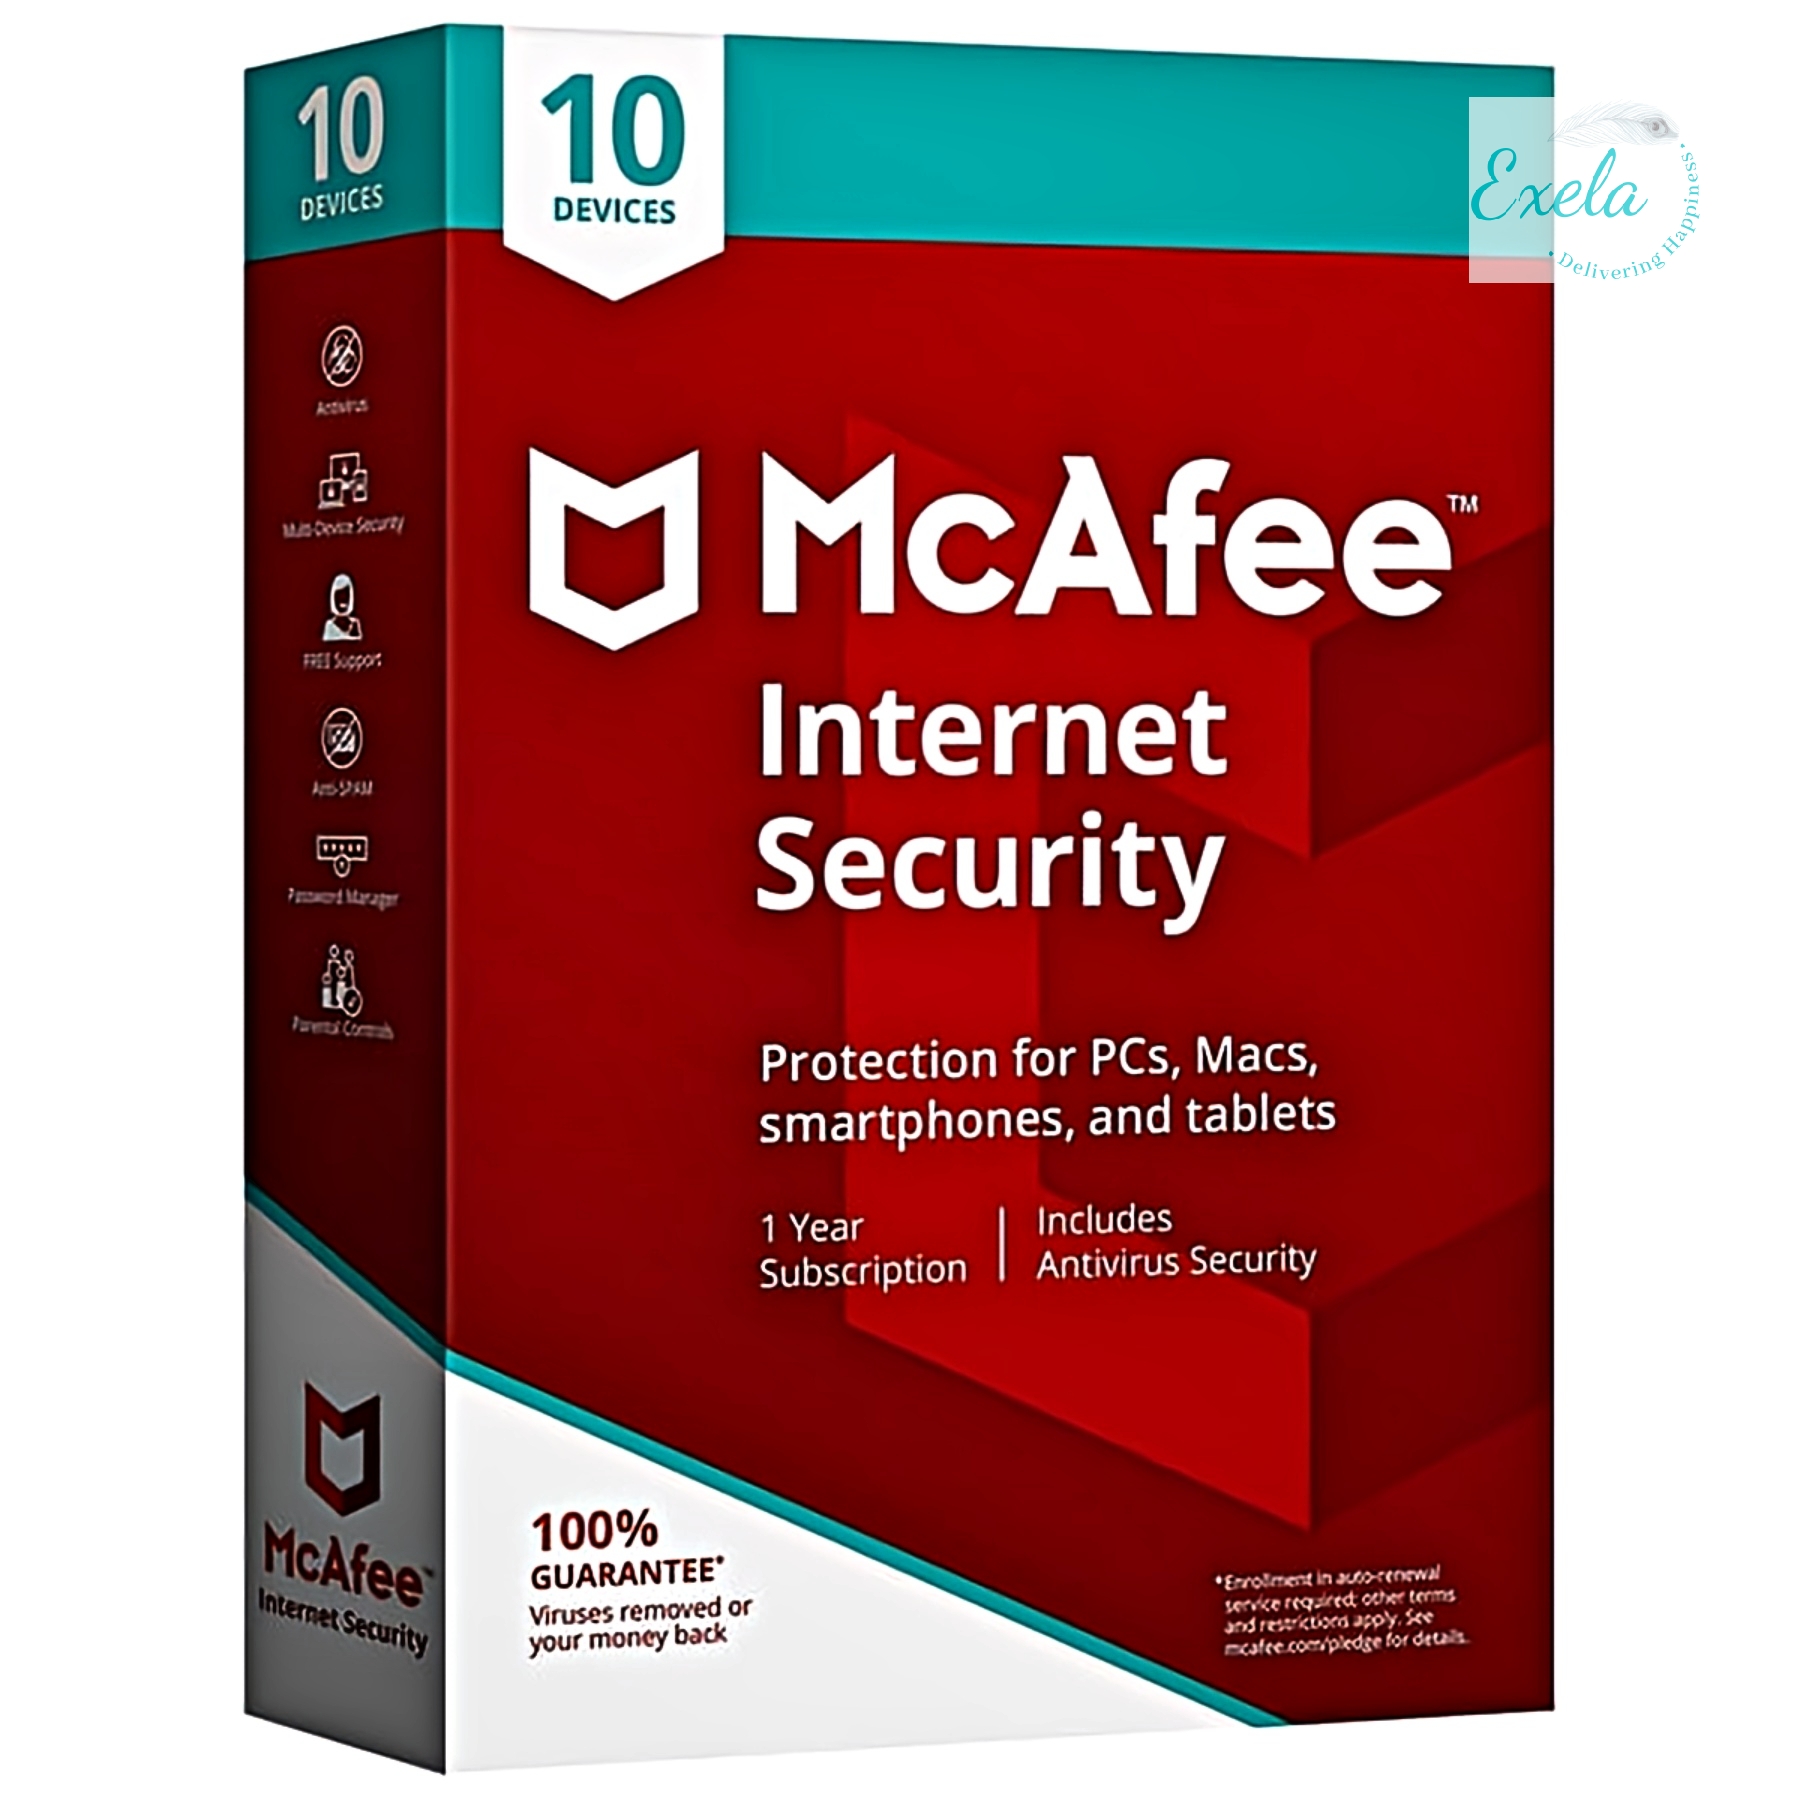 MCAFEE INTERNET SECURITY 2018 - 10 USERS